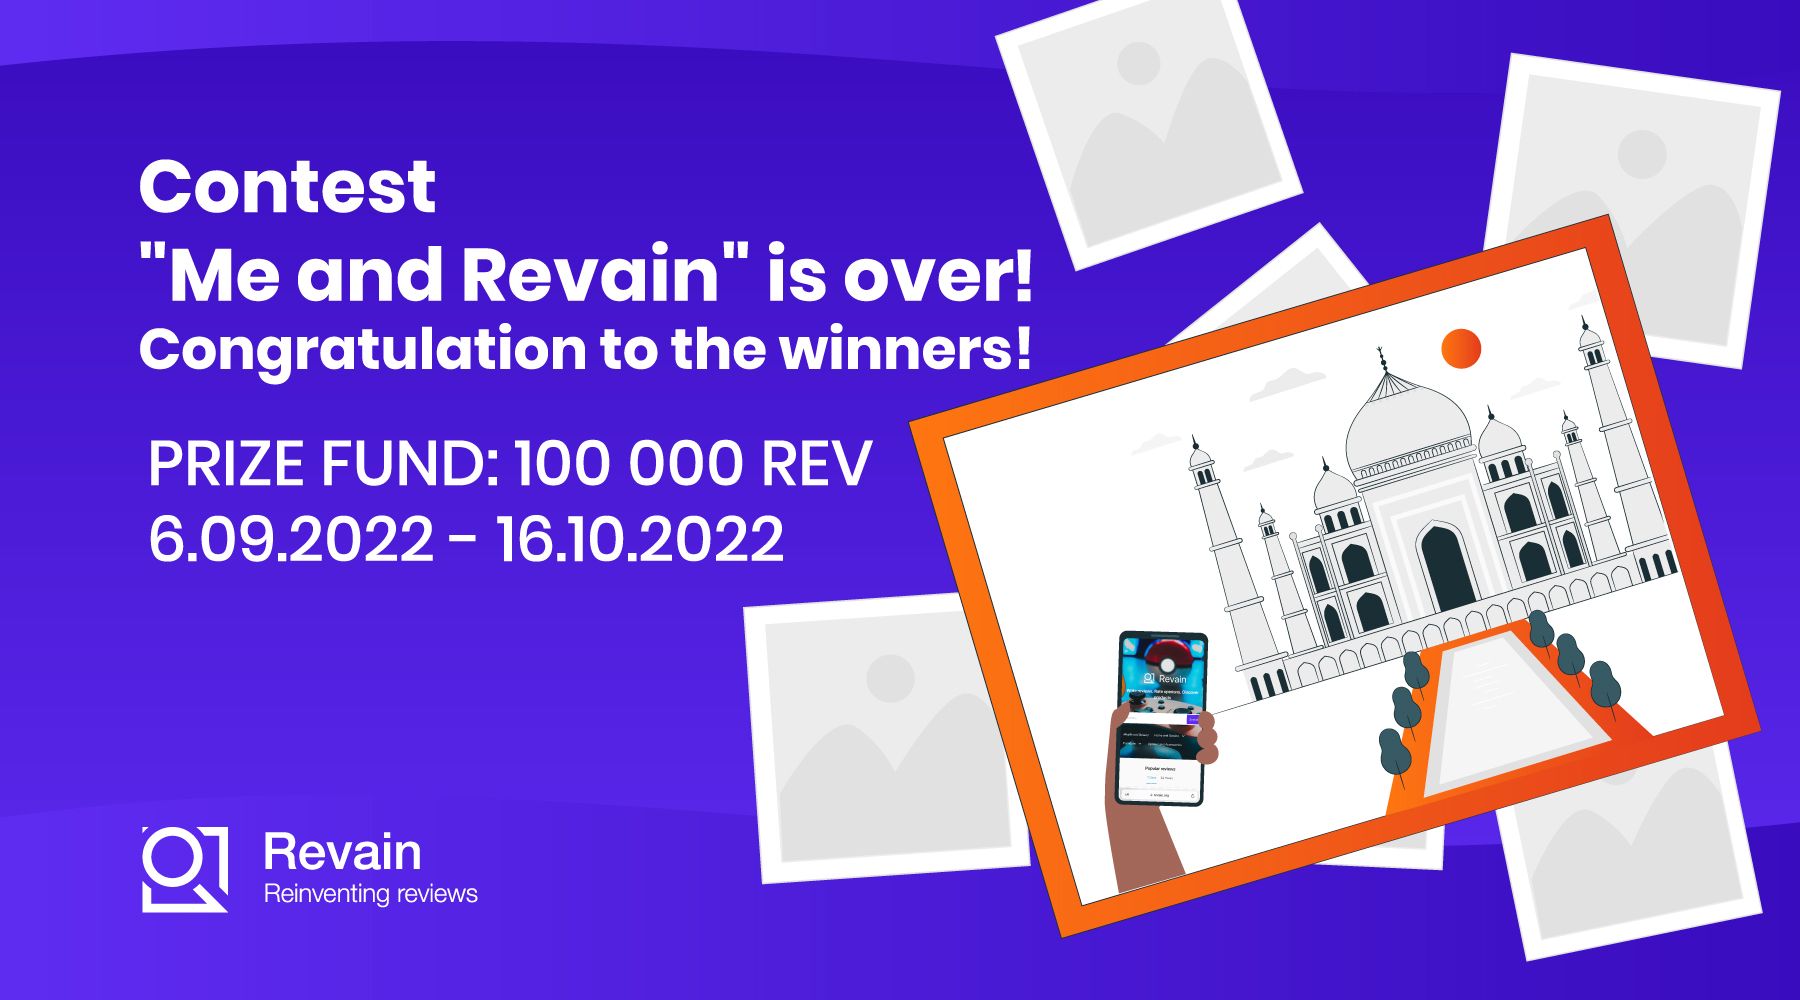 The photo contest "Me and Revain!" is over!